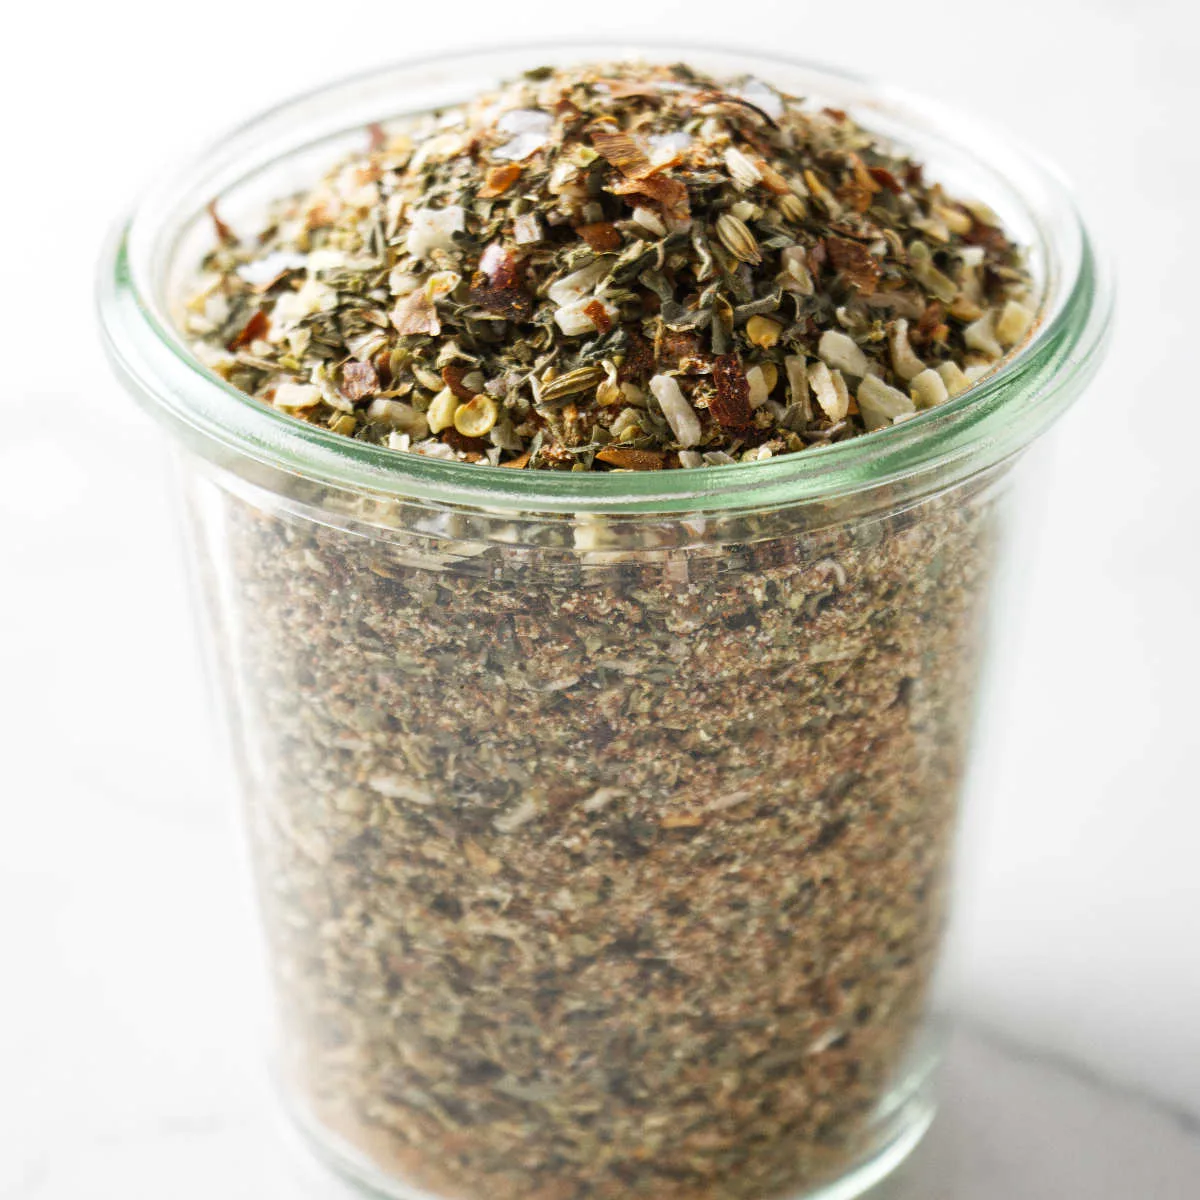 A jar filled with homemade pizza seasoning.